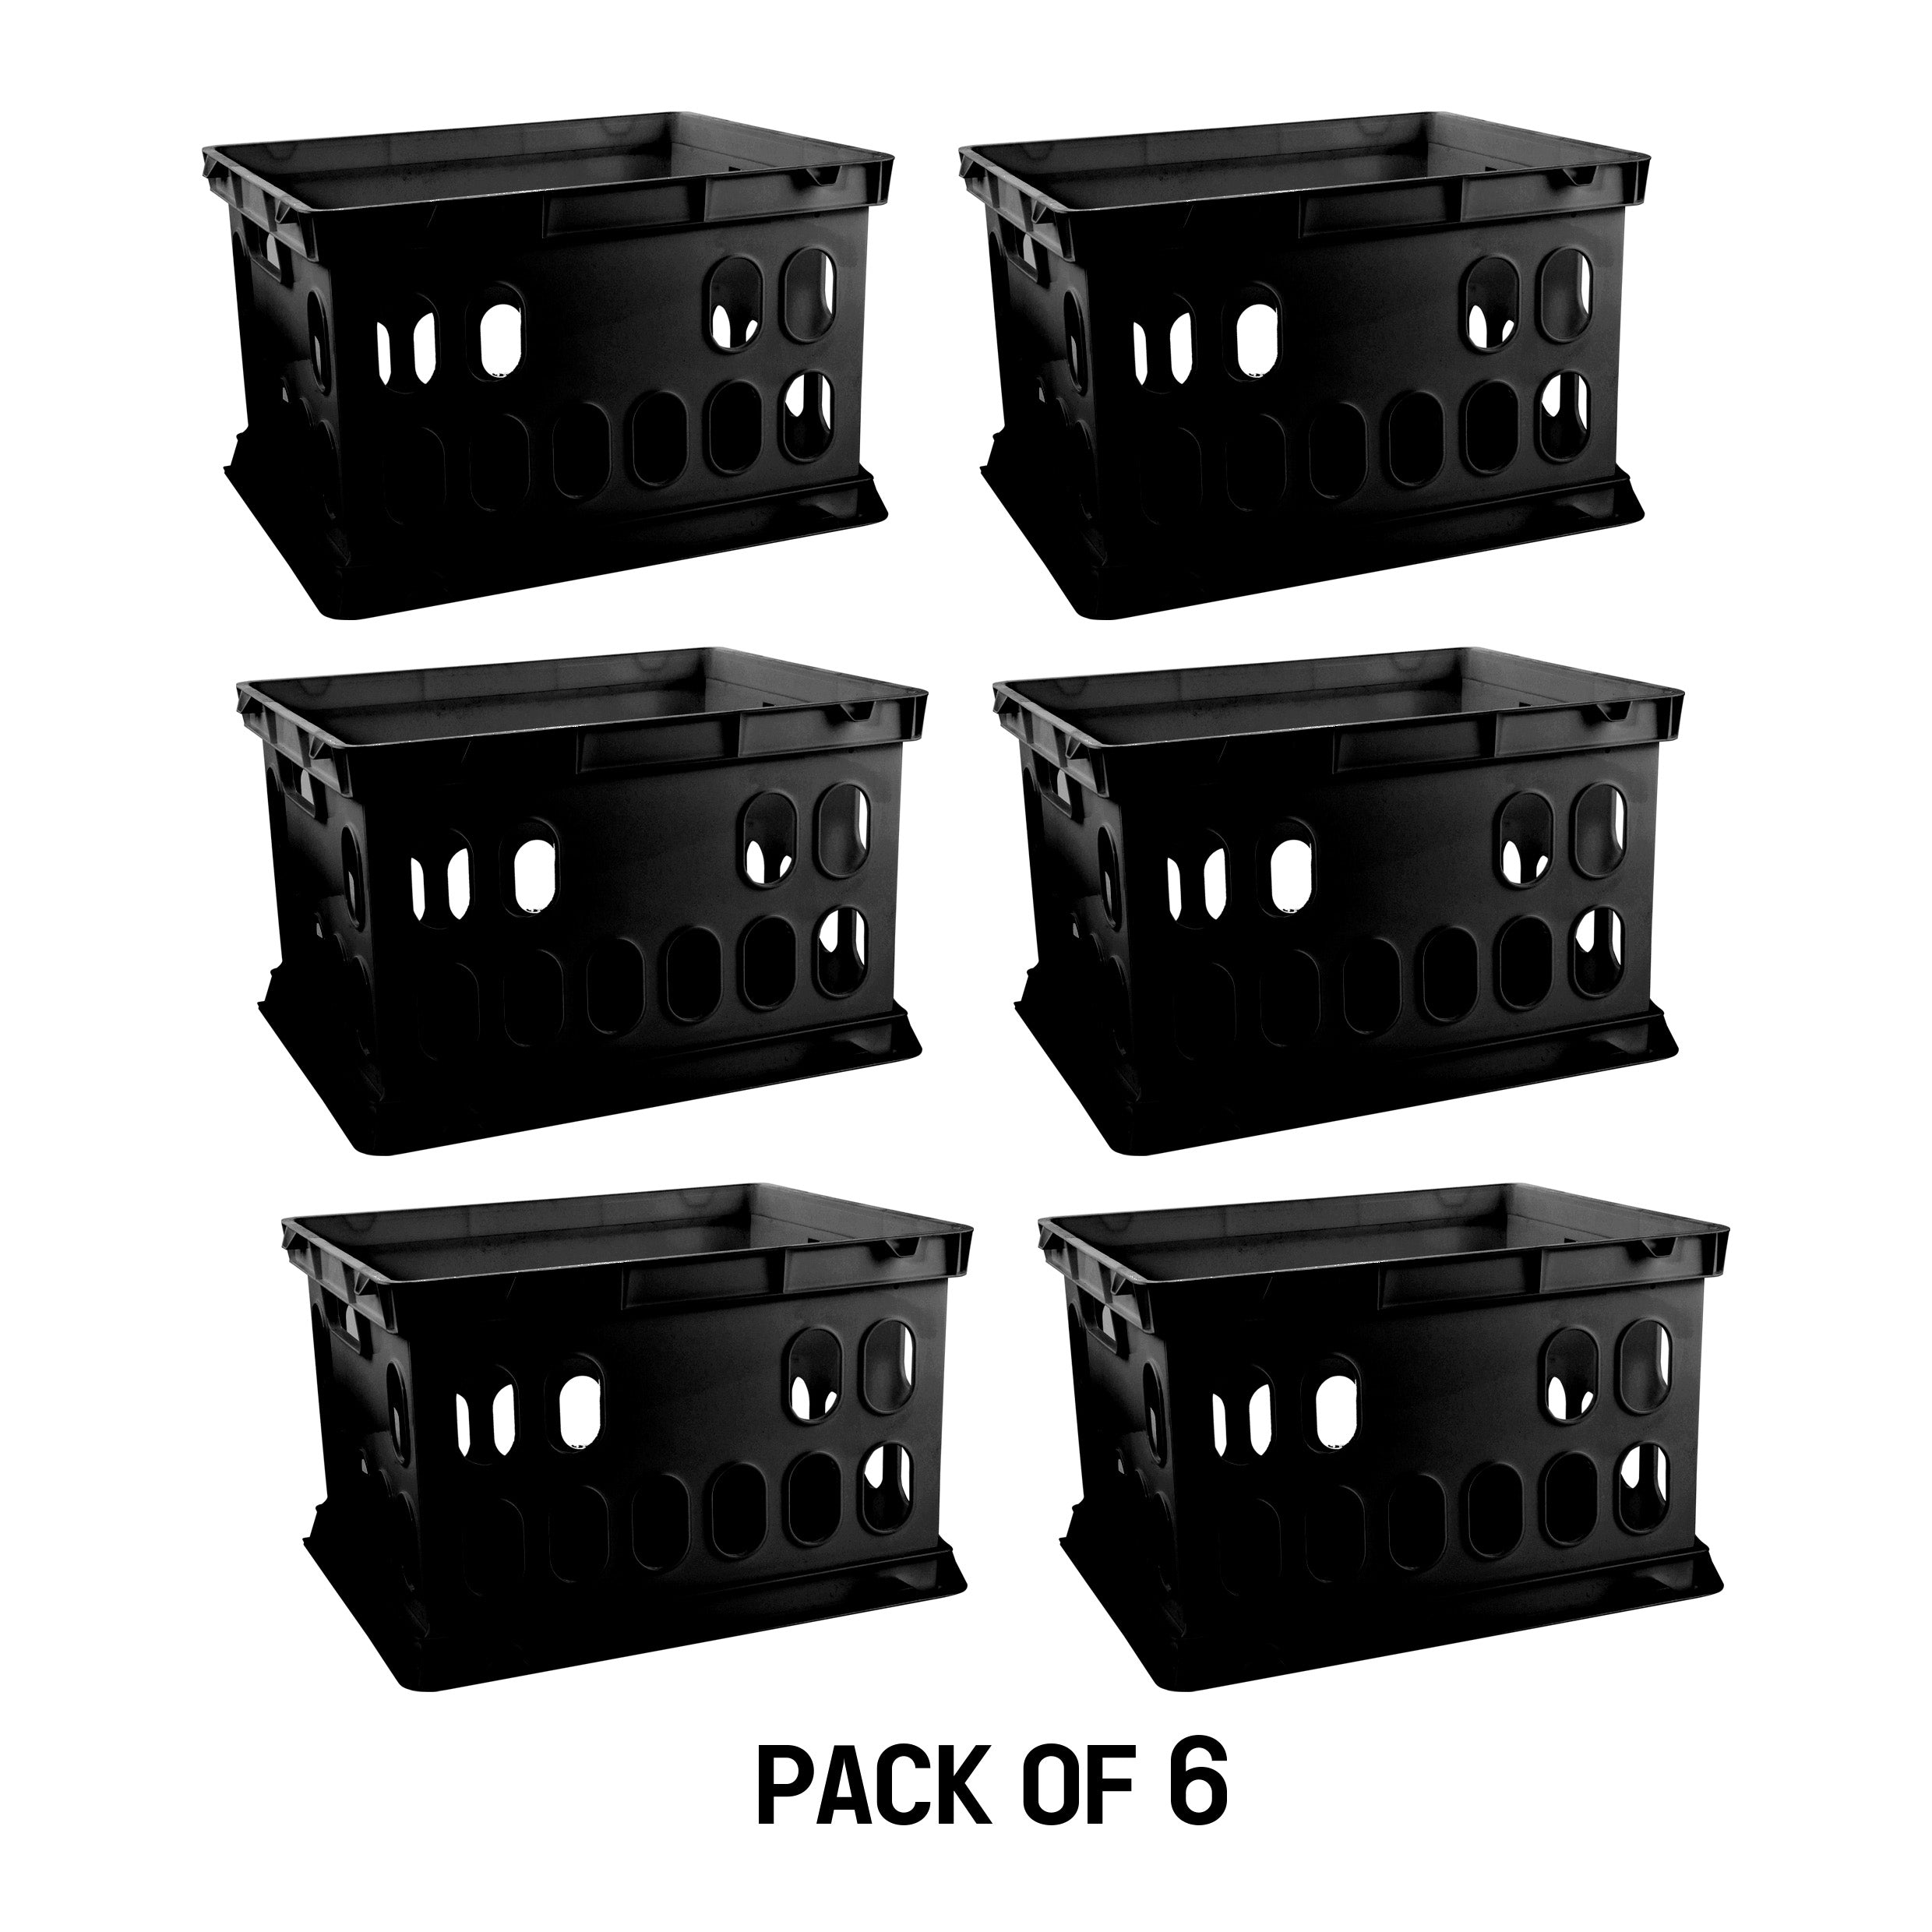 American Maid Crate Large, Pack of 6